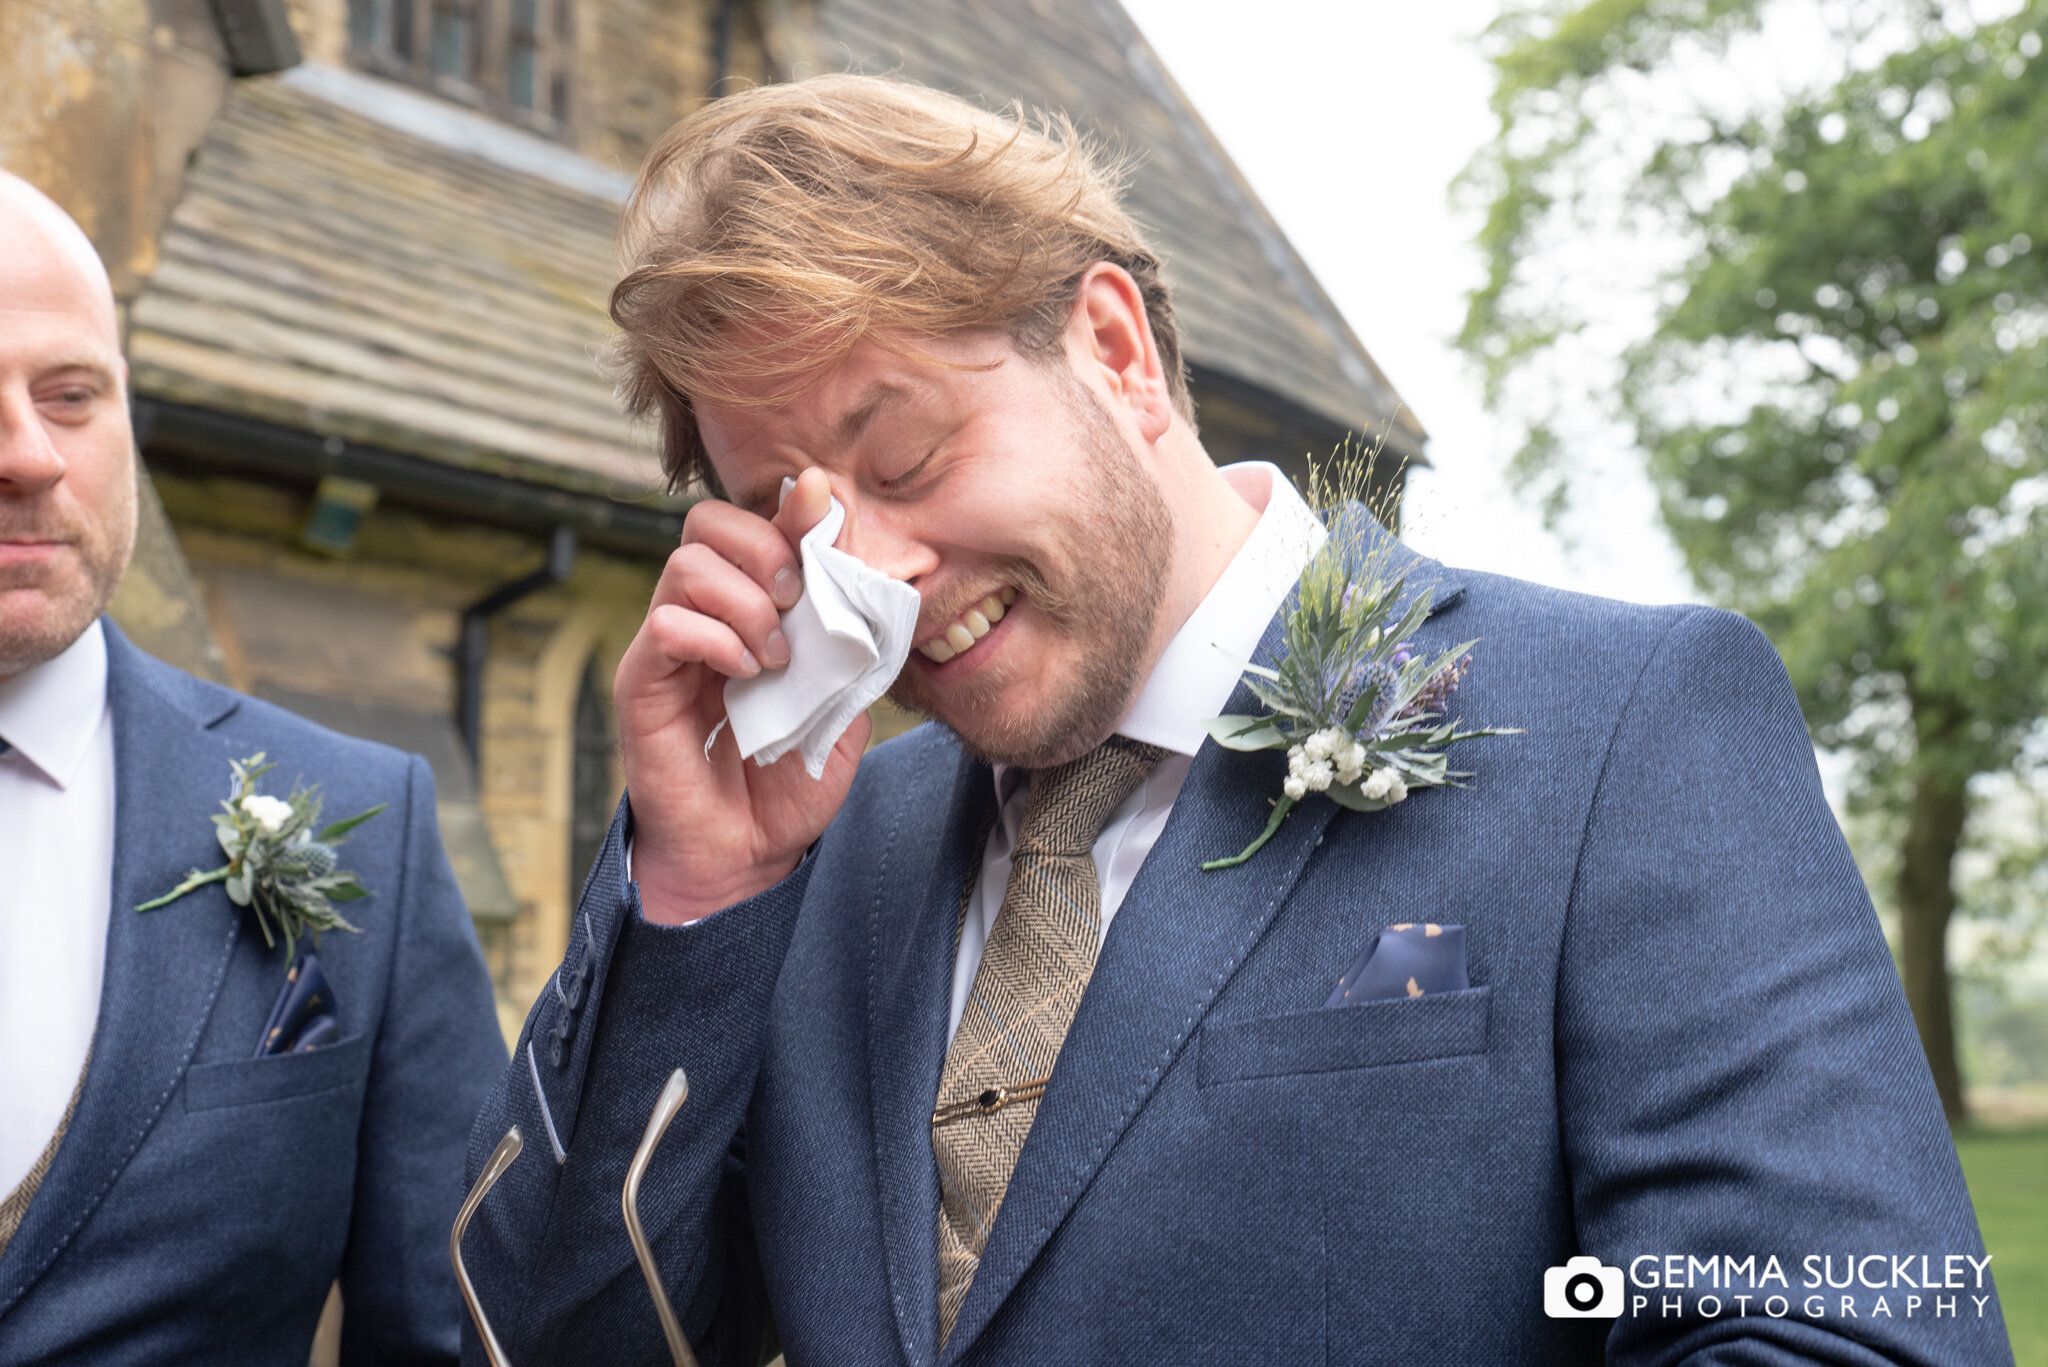 the groom wiping his eyes with a tissue outside the church